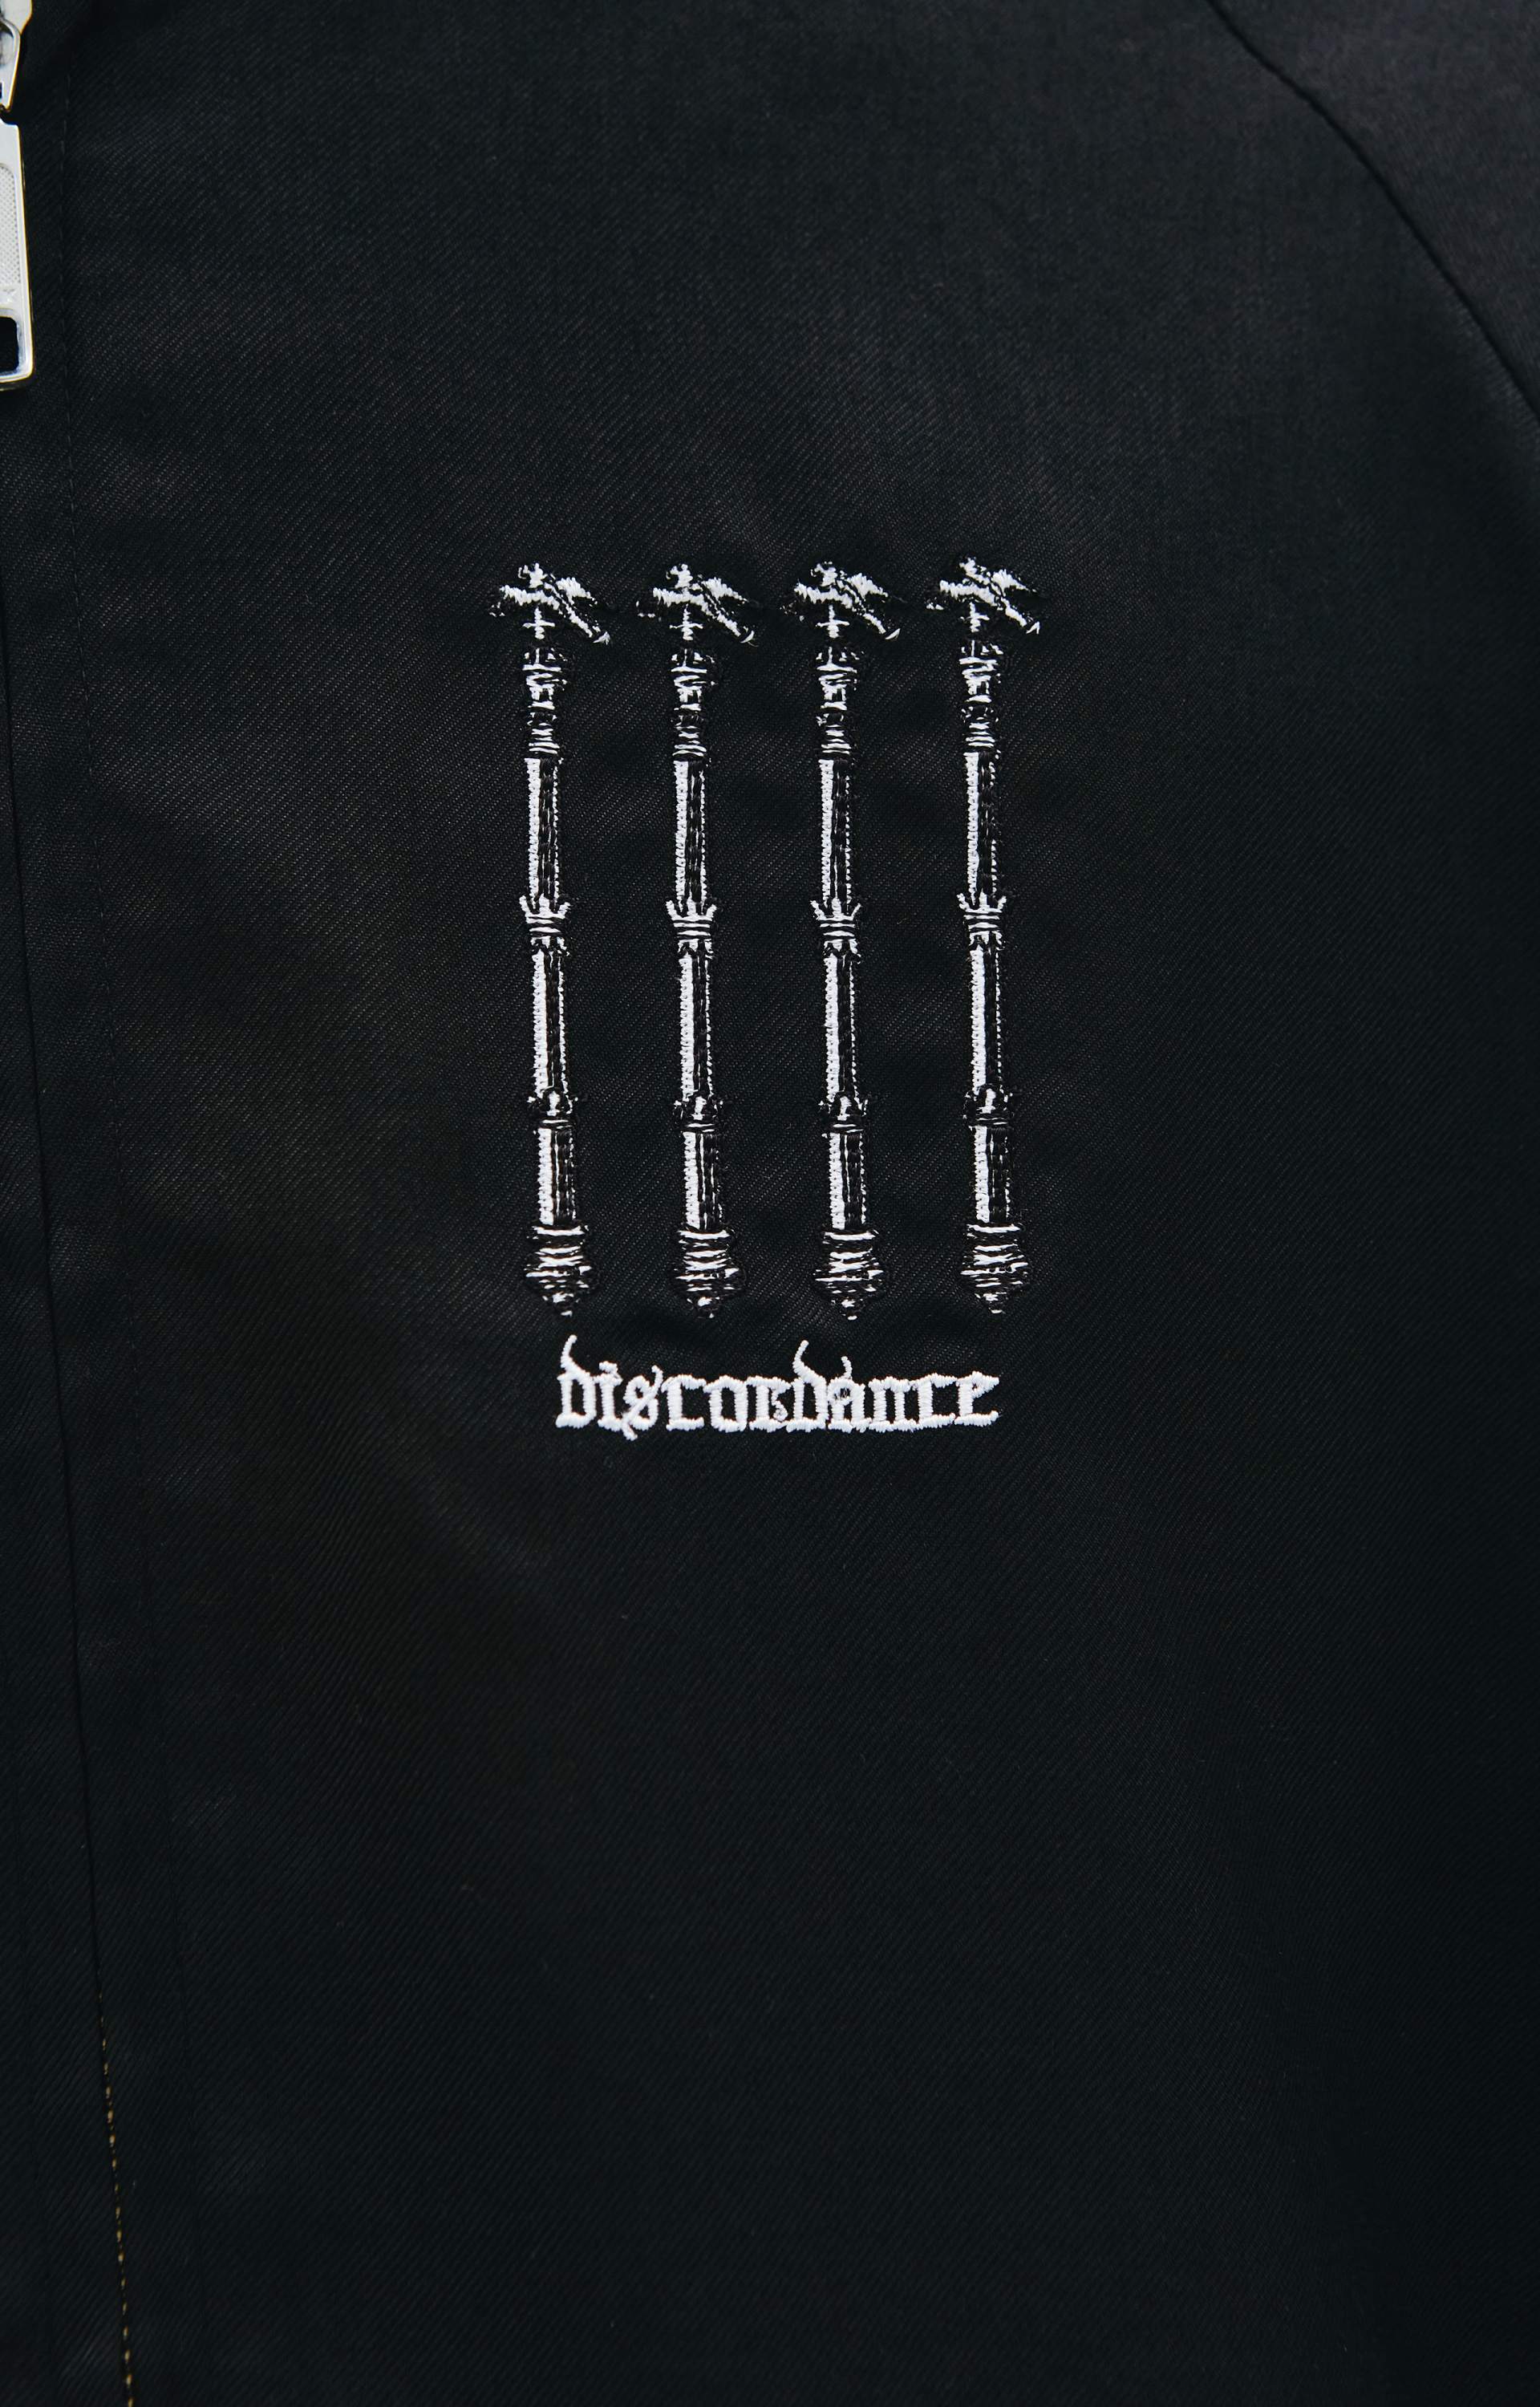 Children of the discordance Embroidery bomber jacket